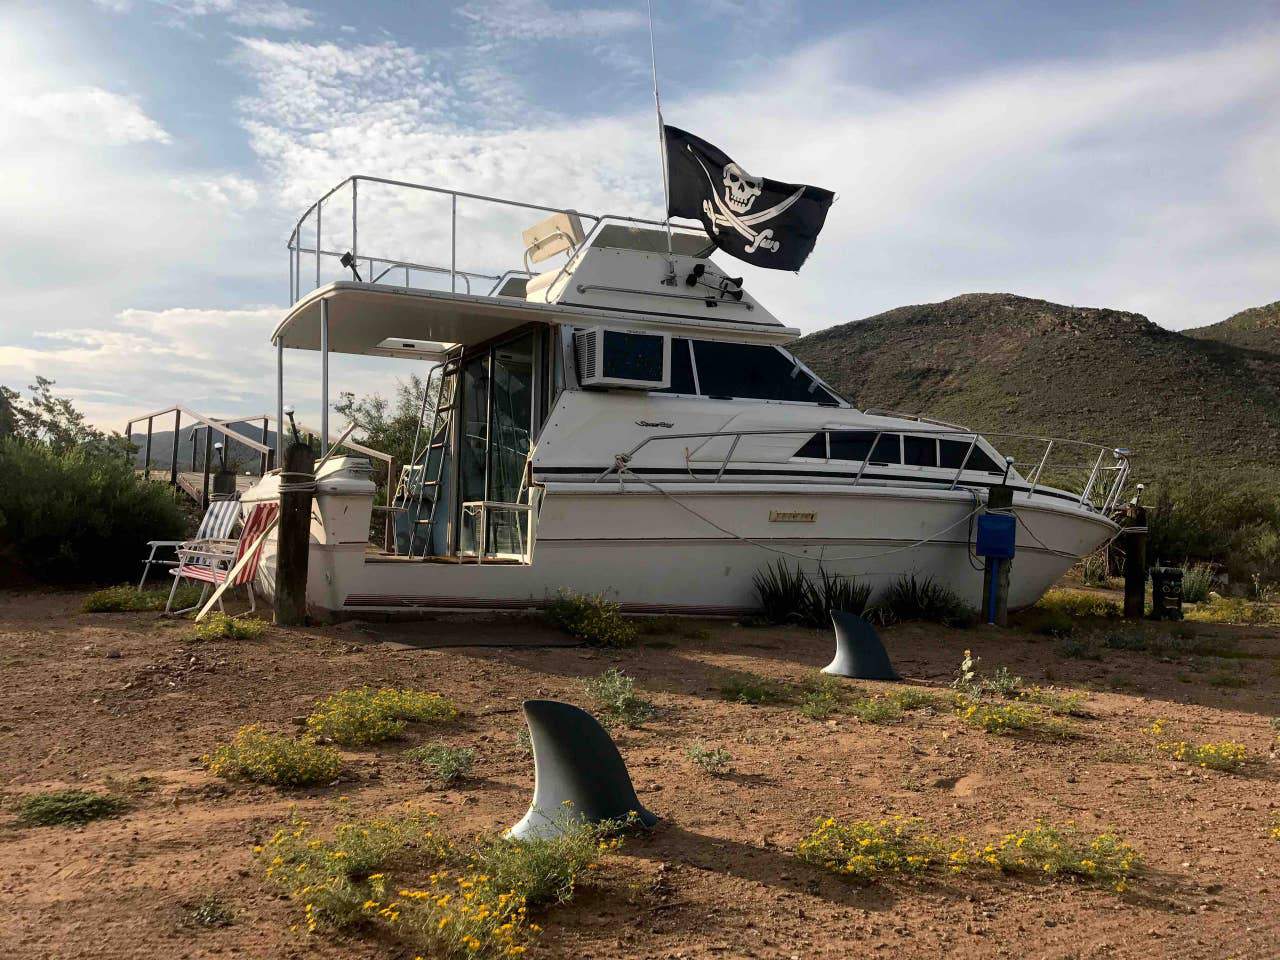 Shiver me timbers: This West Texas Airbnb listing is a clothing-optional yacht docked in the desert